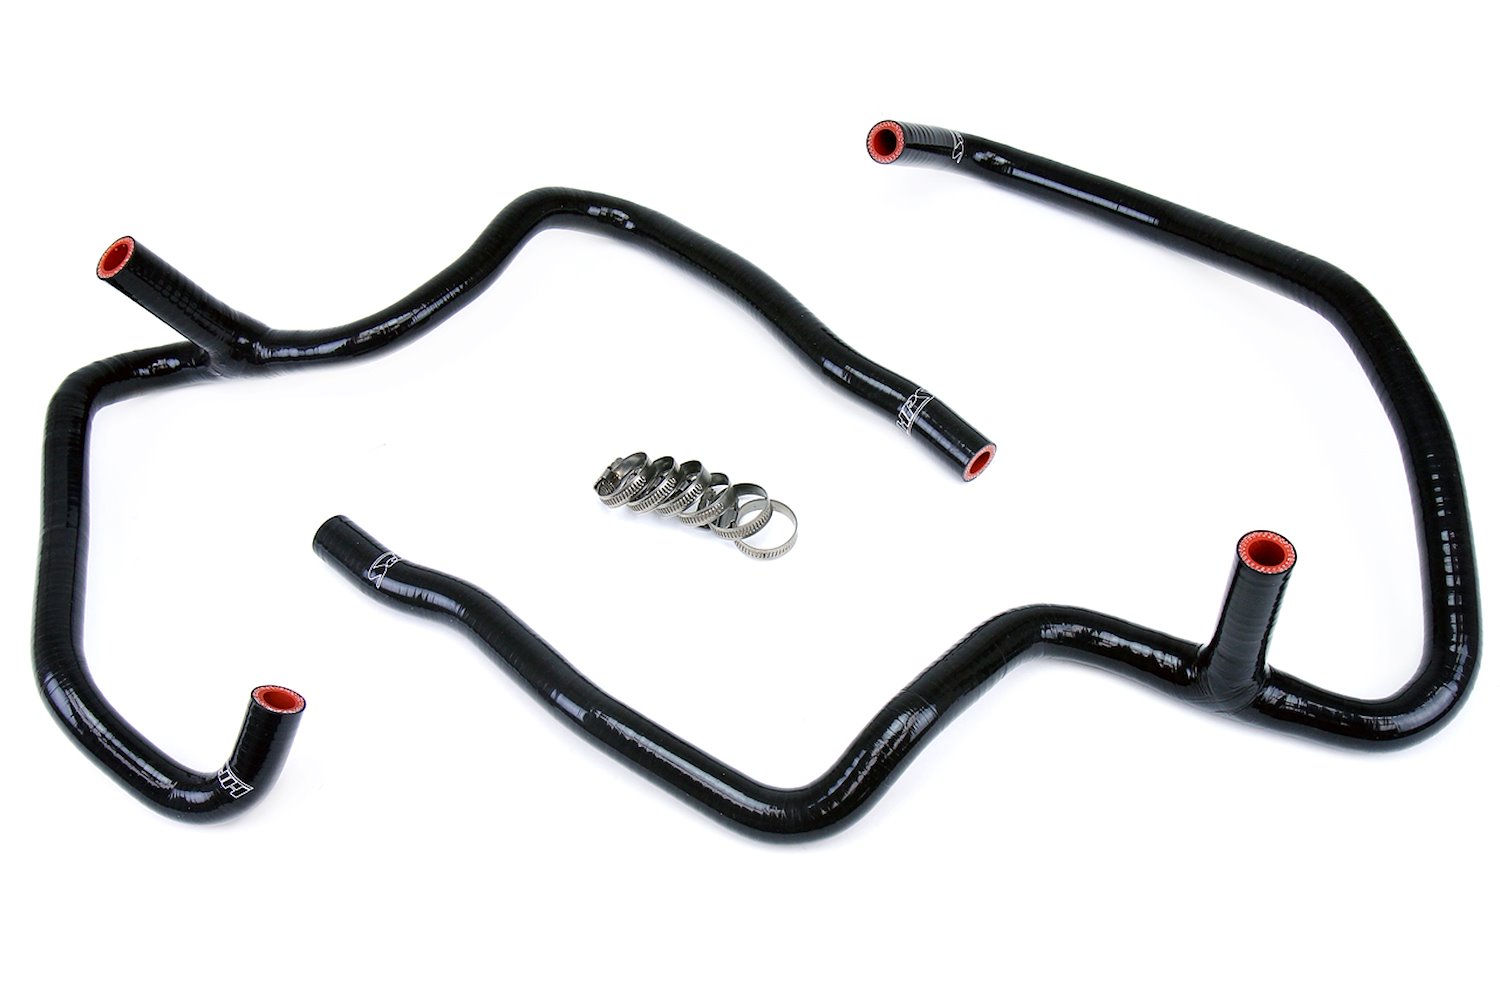 57-1472-BLK Heater Hose Kit, High-Temp 3-Ply Reinforced Silicone, Replace OEM Rubber Heater Coolant Hoses